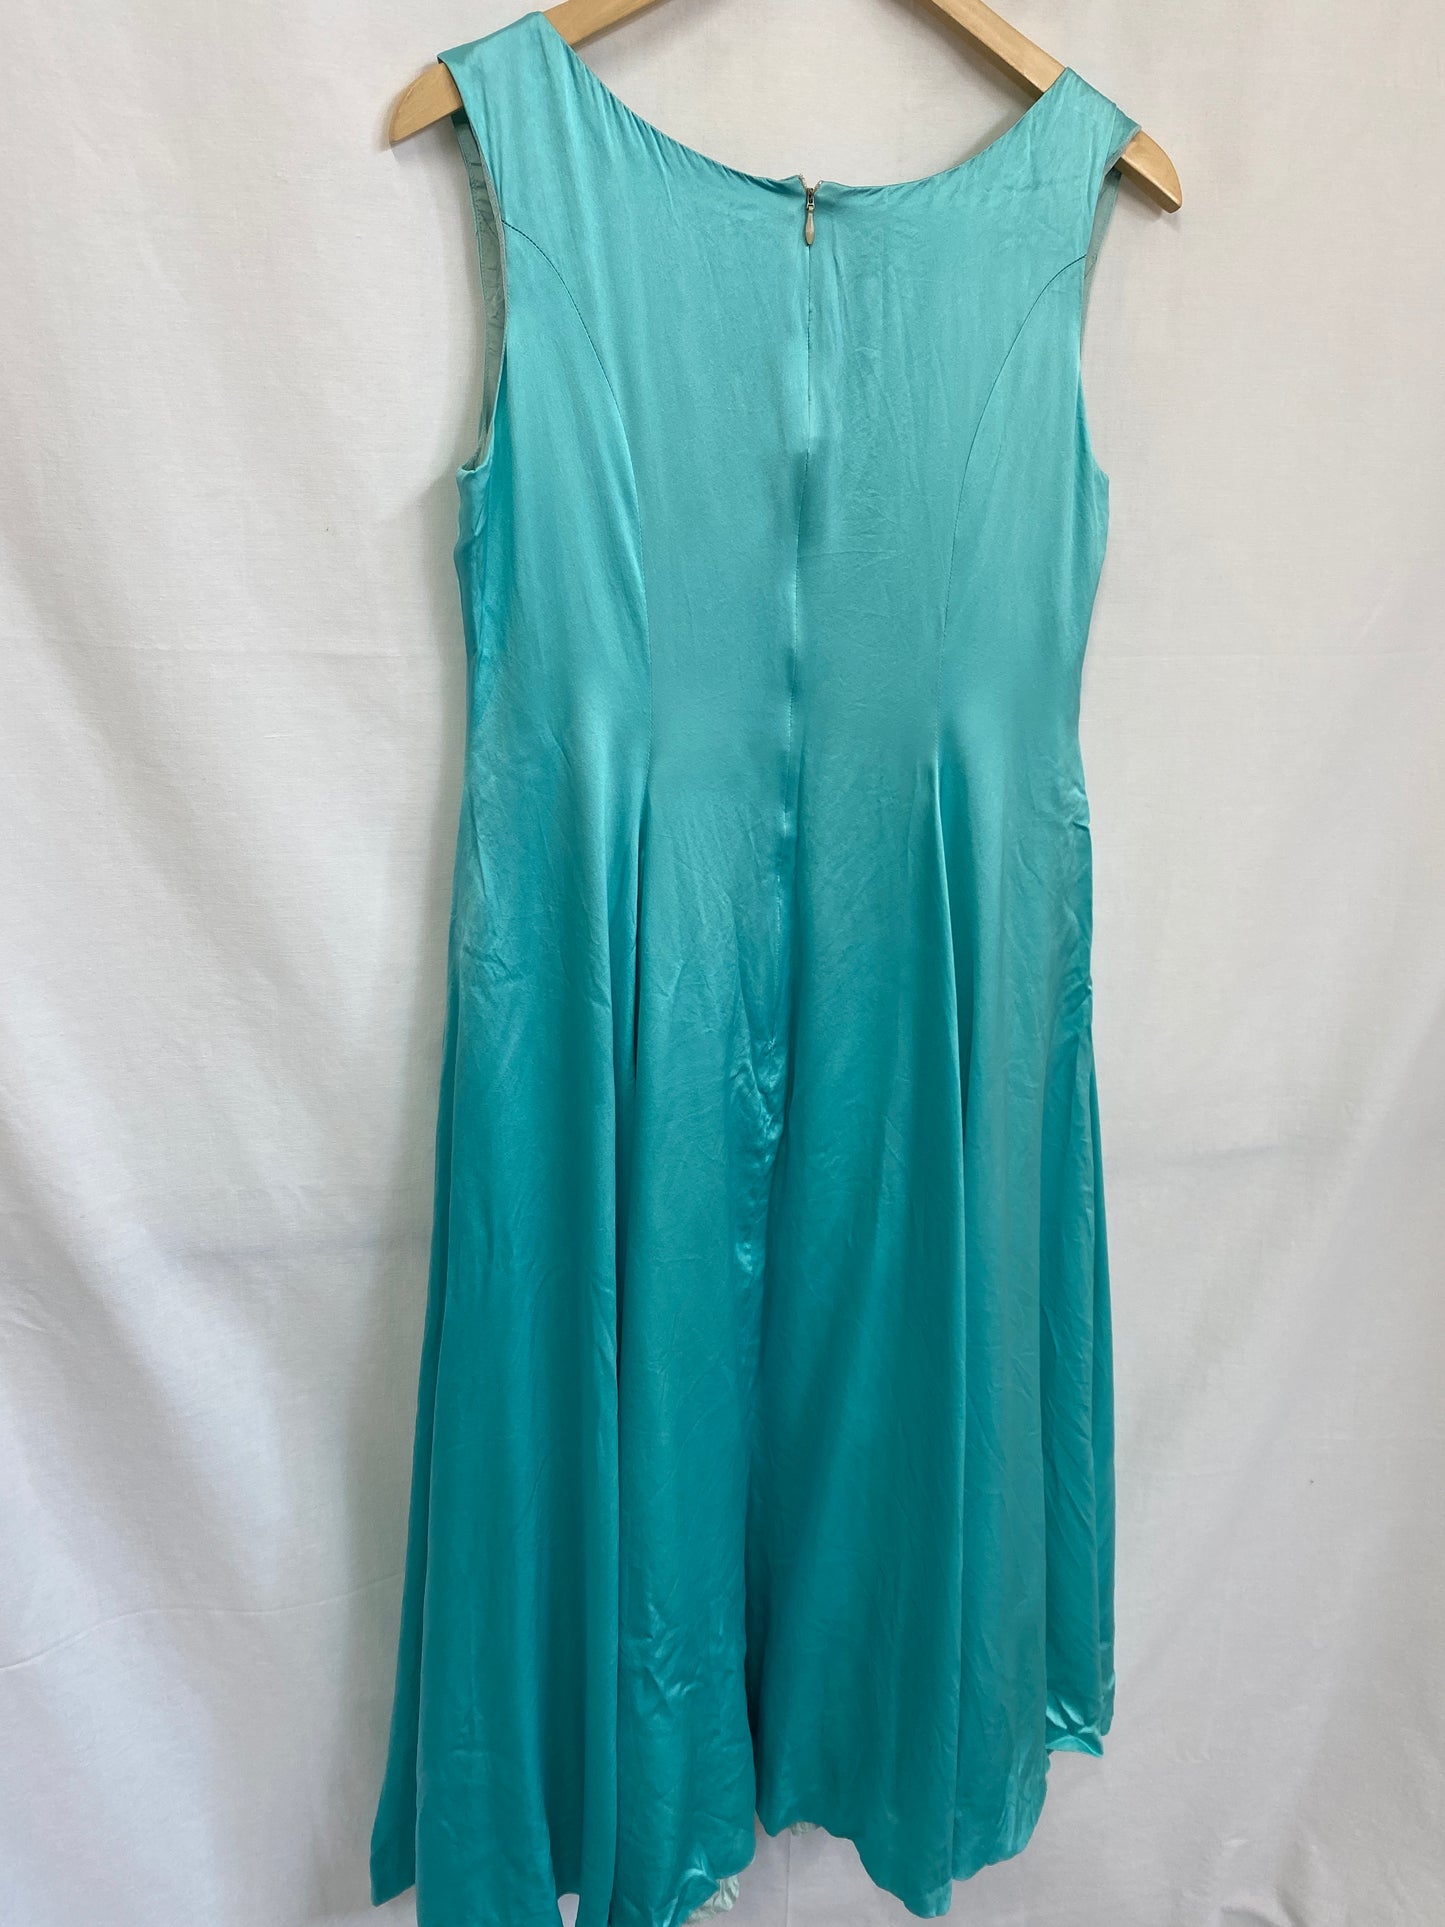 Vintage Mint Fit And Flare Silk Prom Dress Size 14